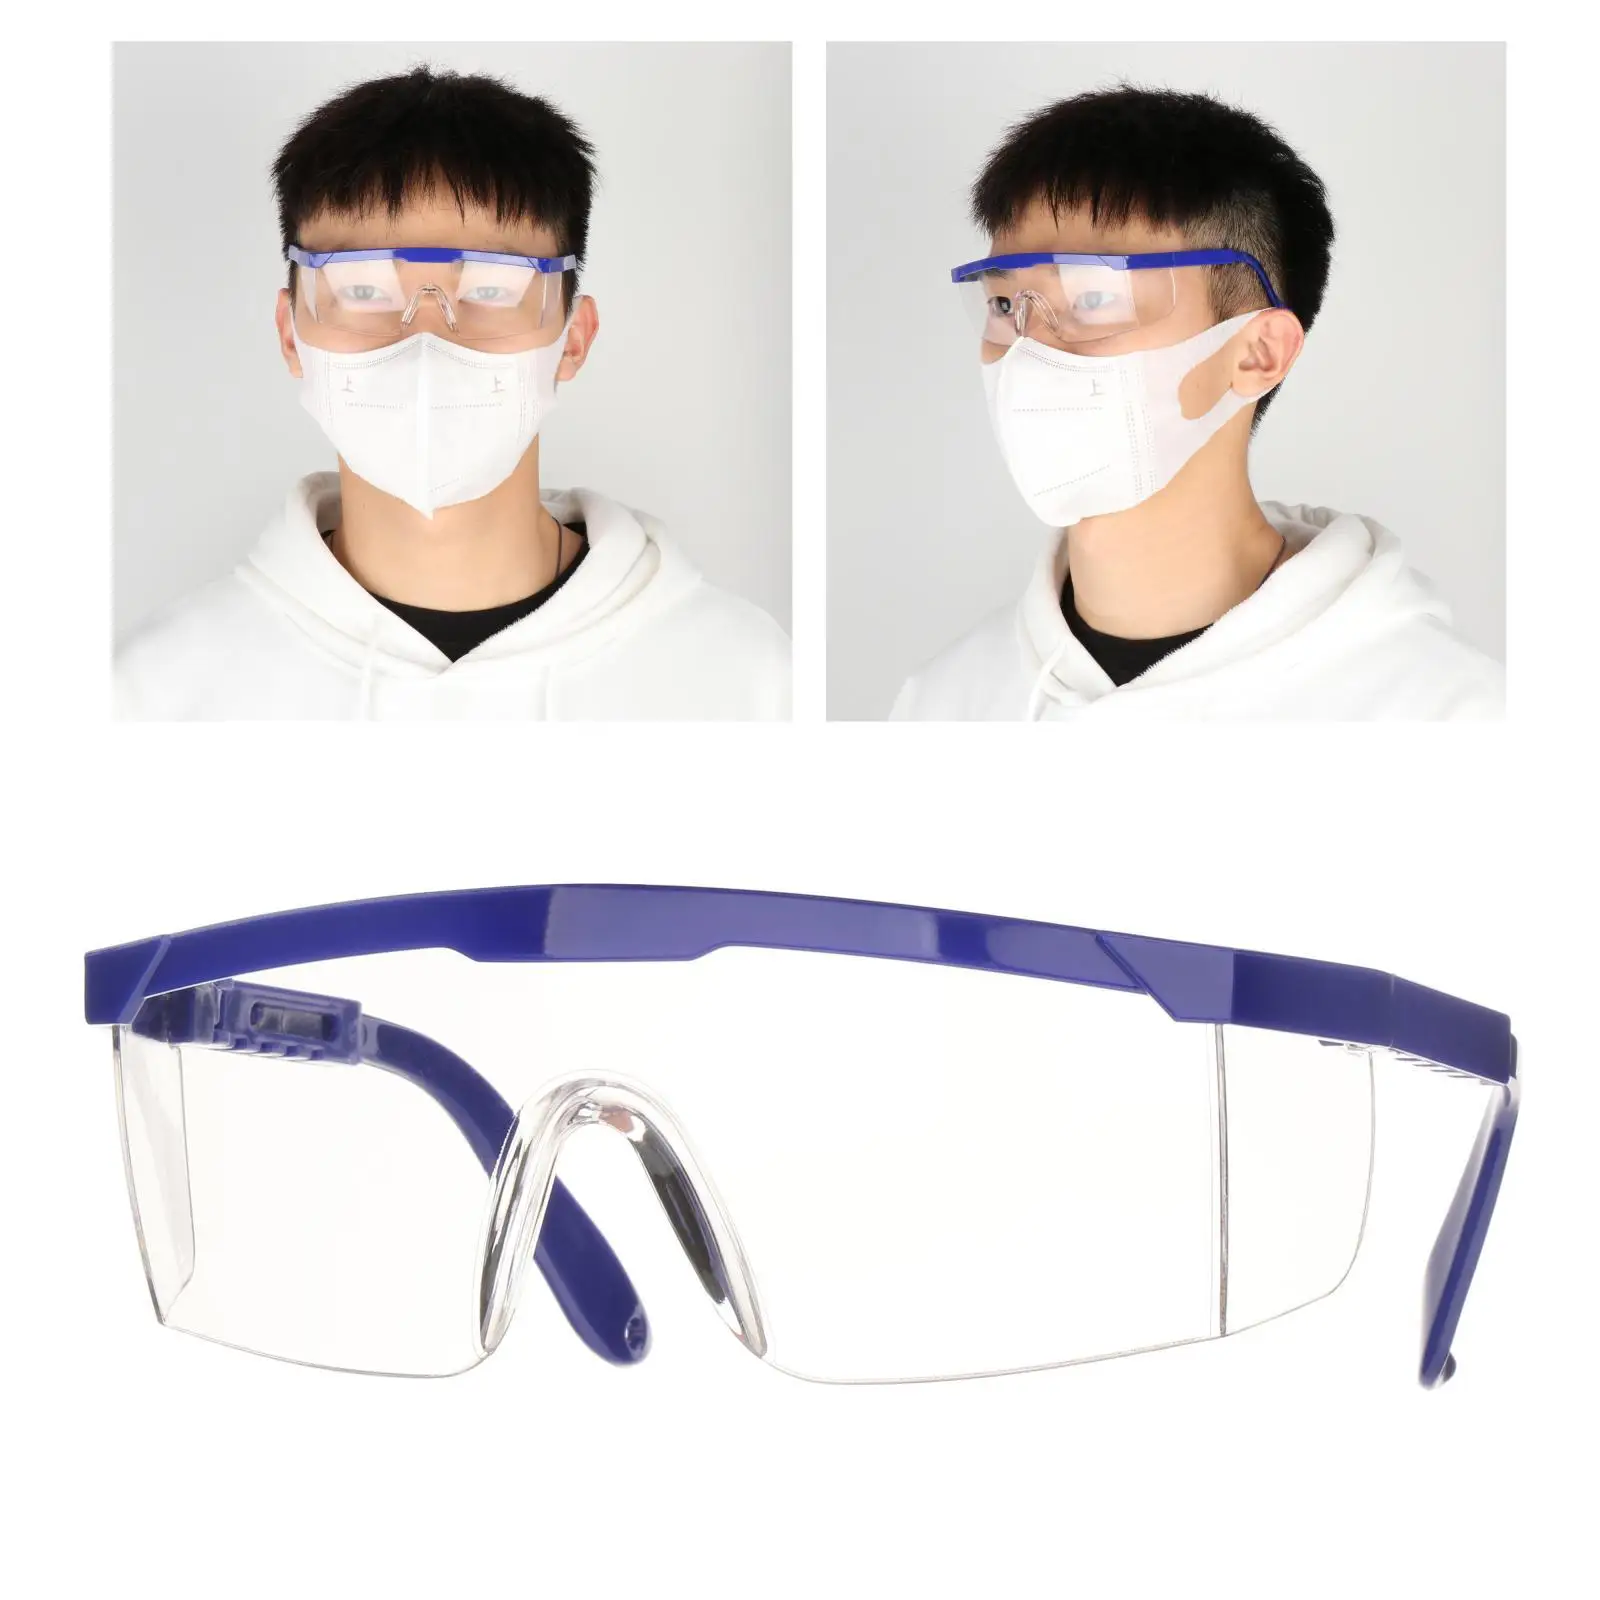 Anti Fog Safety Goggles Glasses Clear Lab Goggles Scratchproof Glasses Anti-Shock Lightweight for Welding Outdoor Sports Sanding